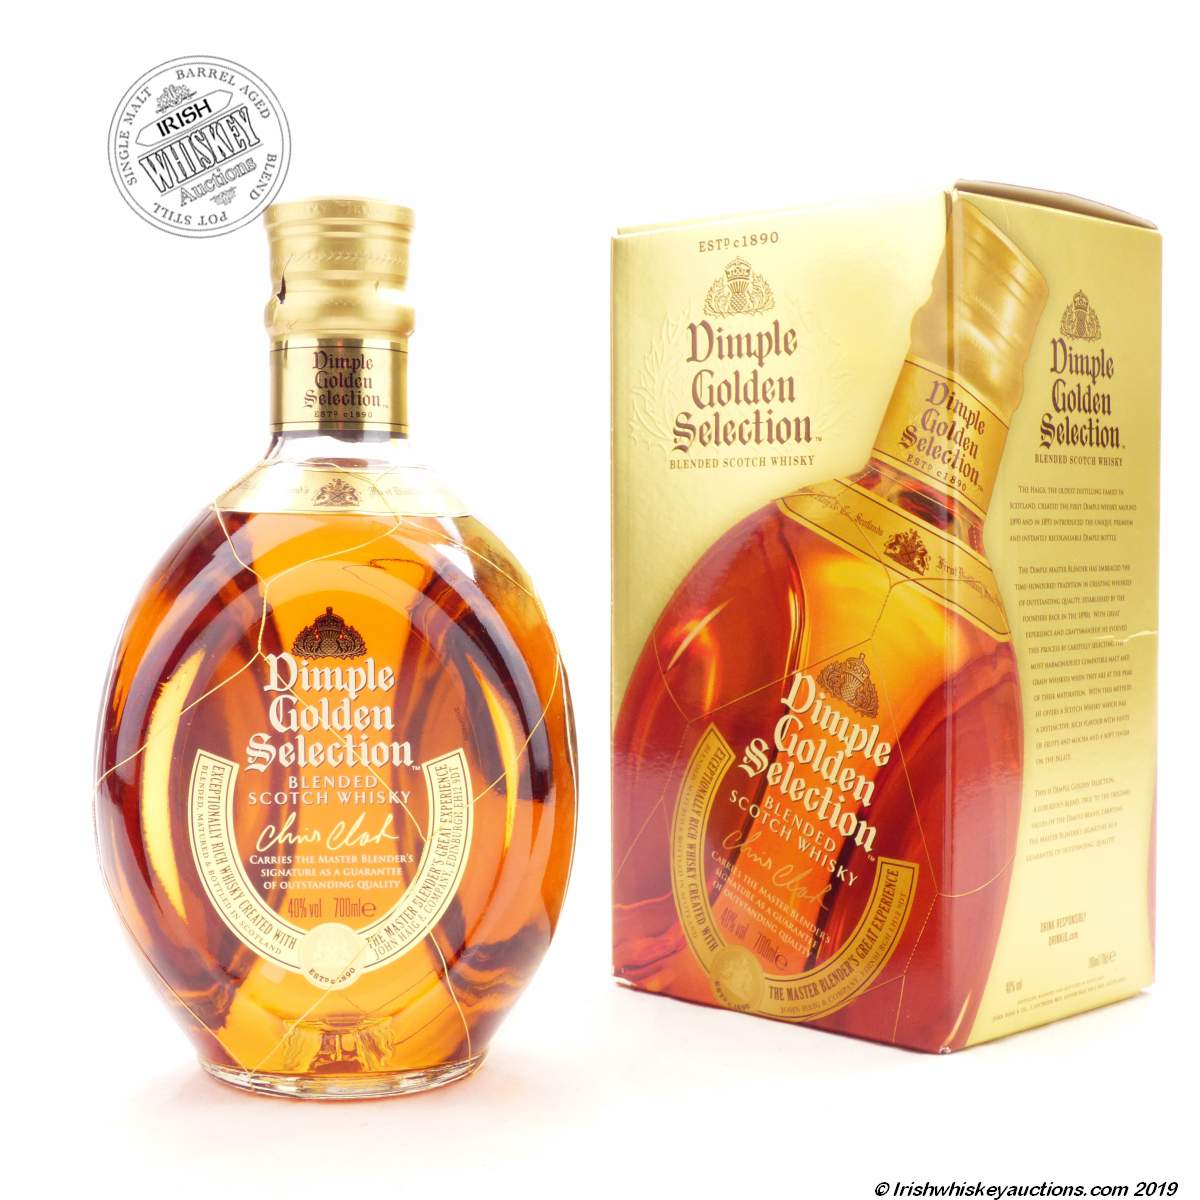 Irish Whiskey Selection Auctions Scotch Golden Blended Whisky Dimple 